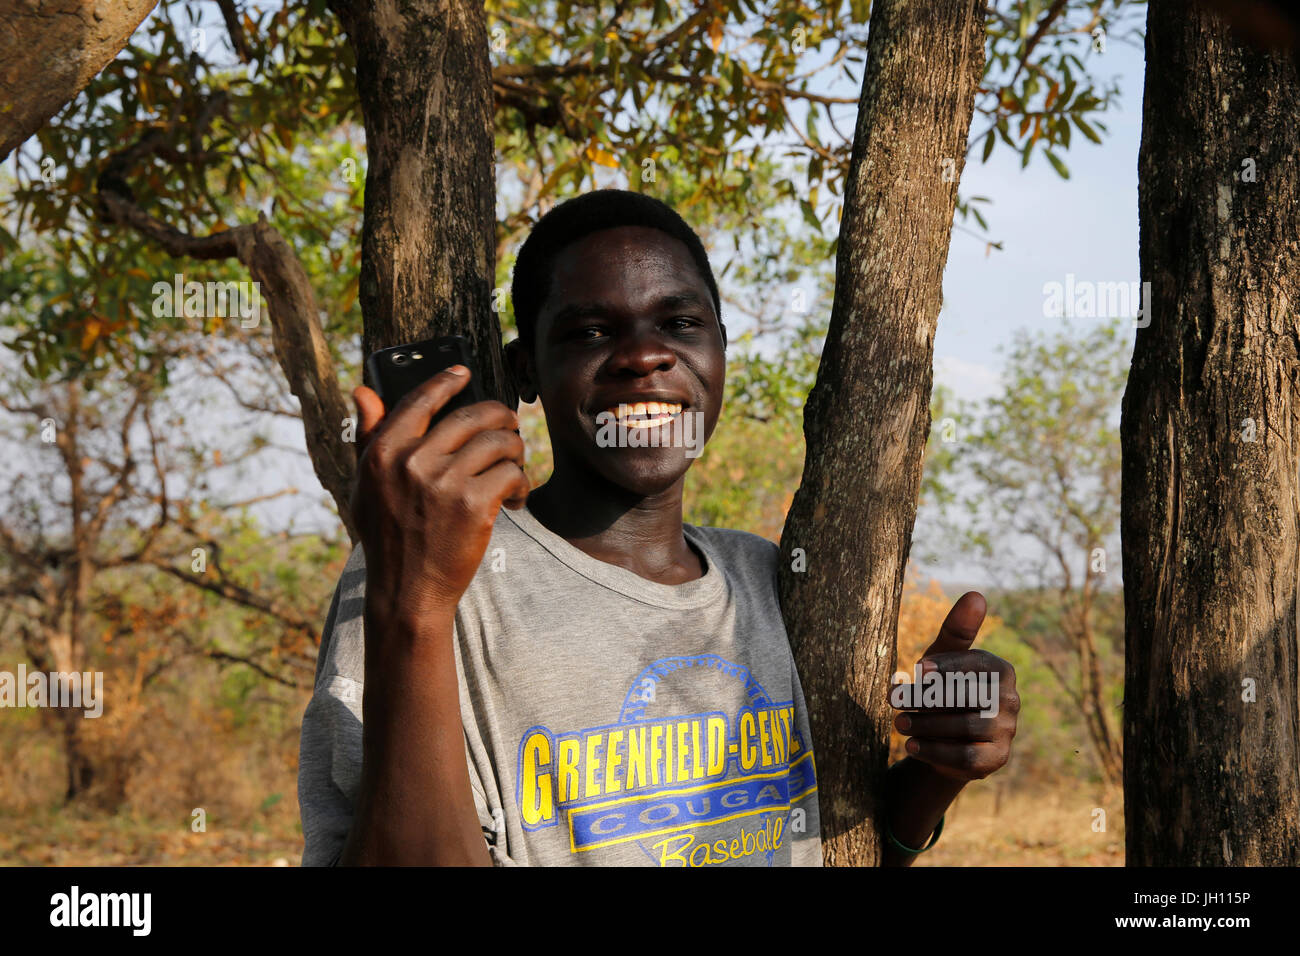 Ugandan holding a cell phone in a remote rural area. Uganda. Stock Photo